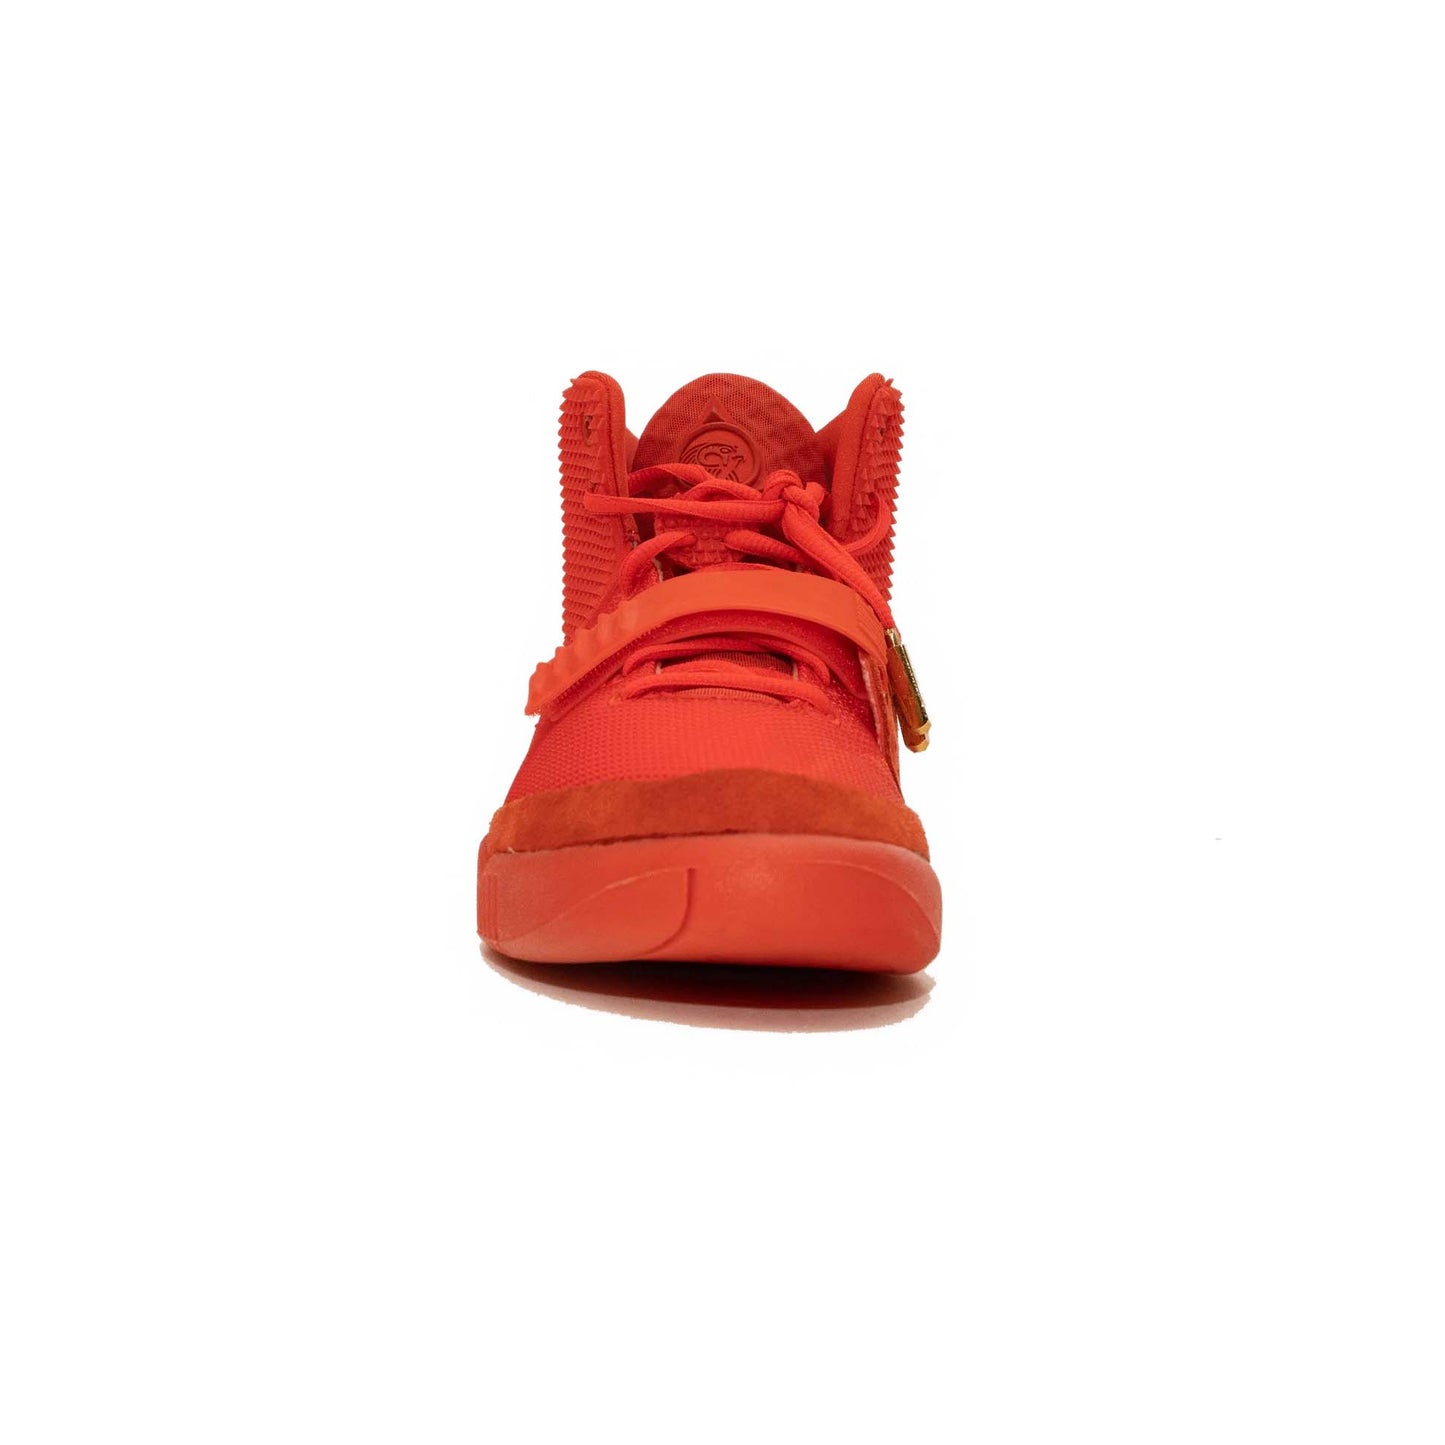 Nike Air Yeezy 2, SP Red October